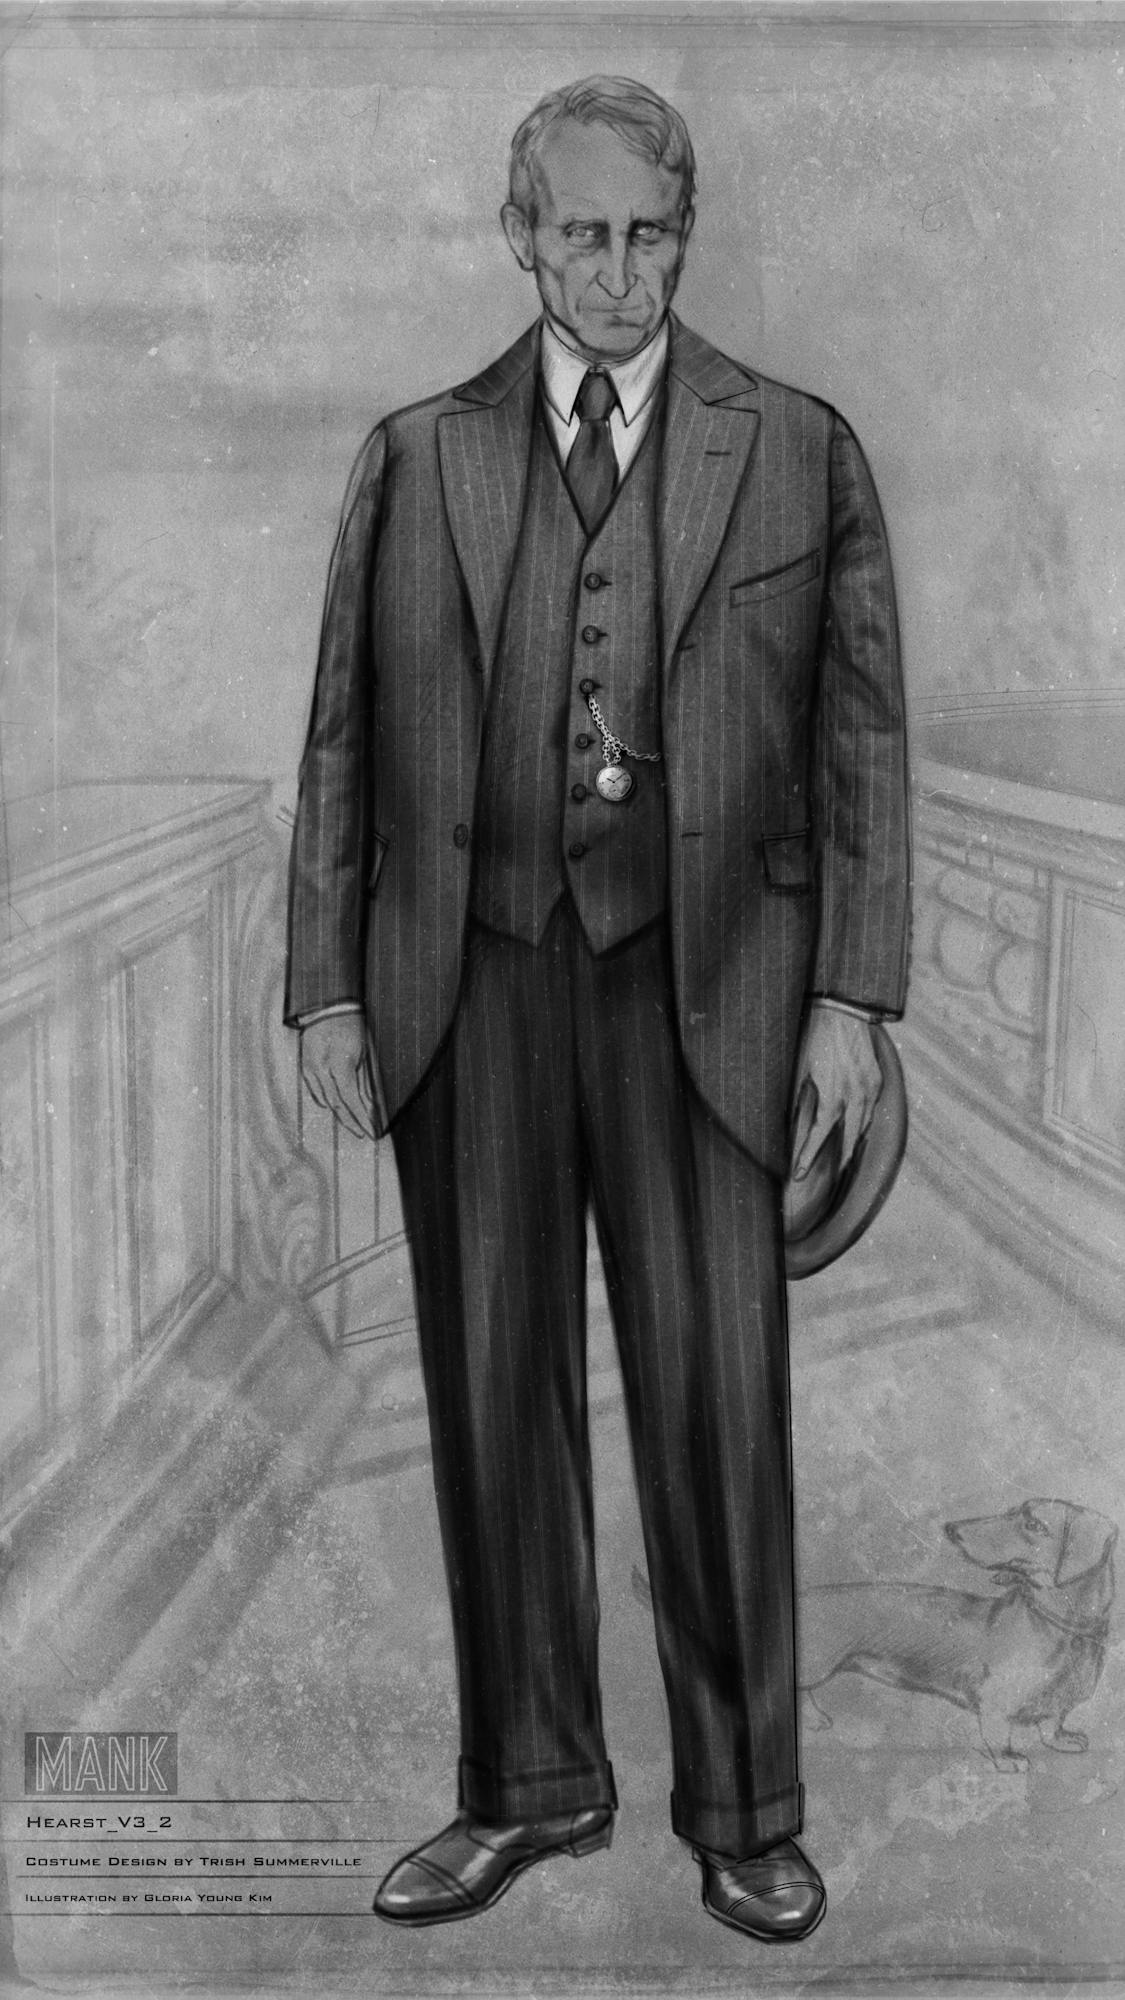 Black-and-white costume sketch for William Randolph Hearst. He looks stern in a pinstripe suit, holding his hat, with a pocket watch peeking through his open jacket. 